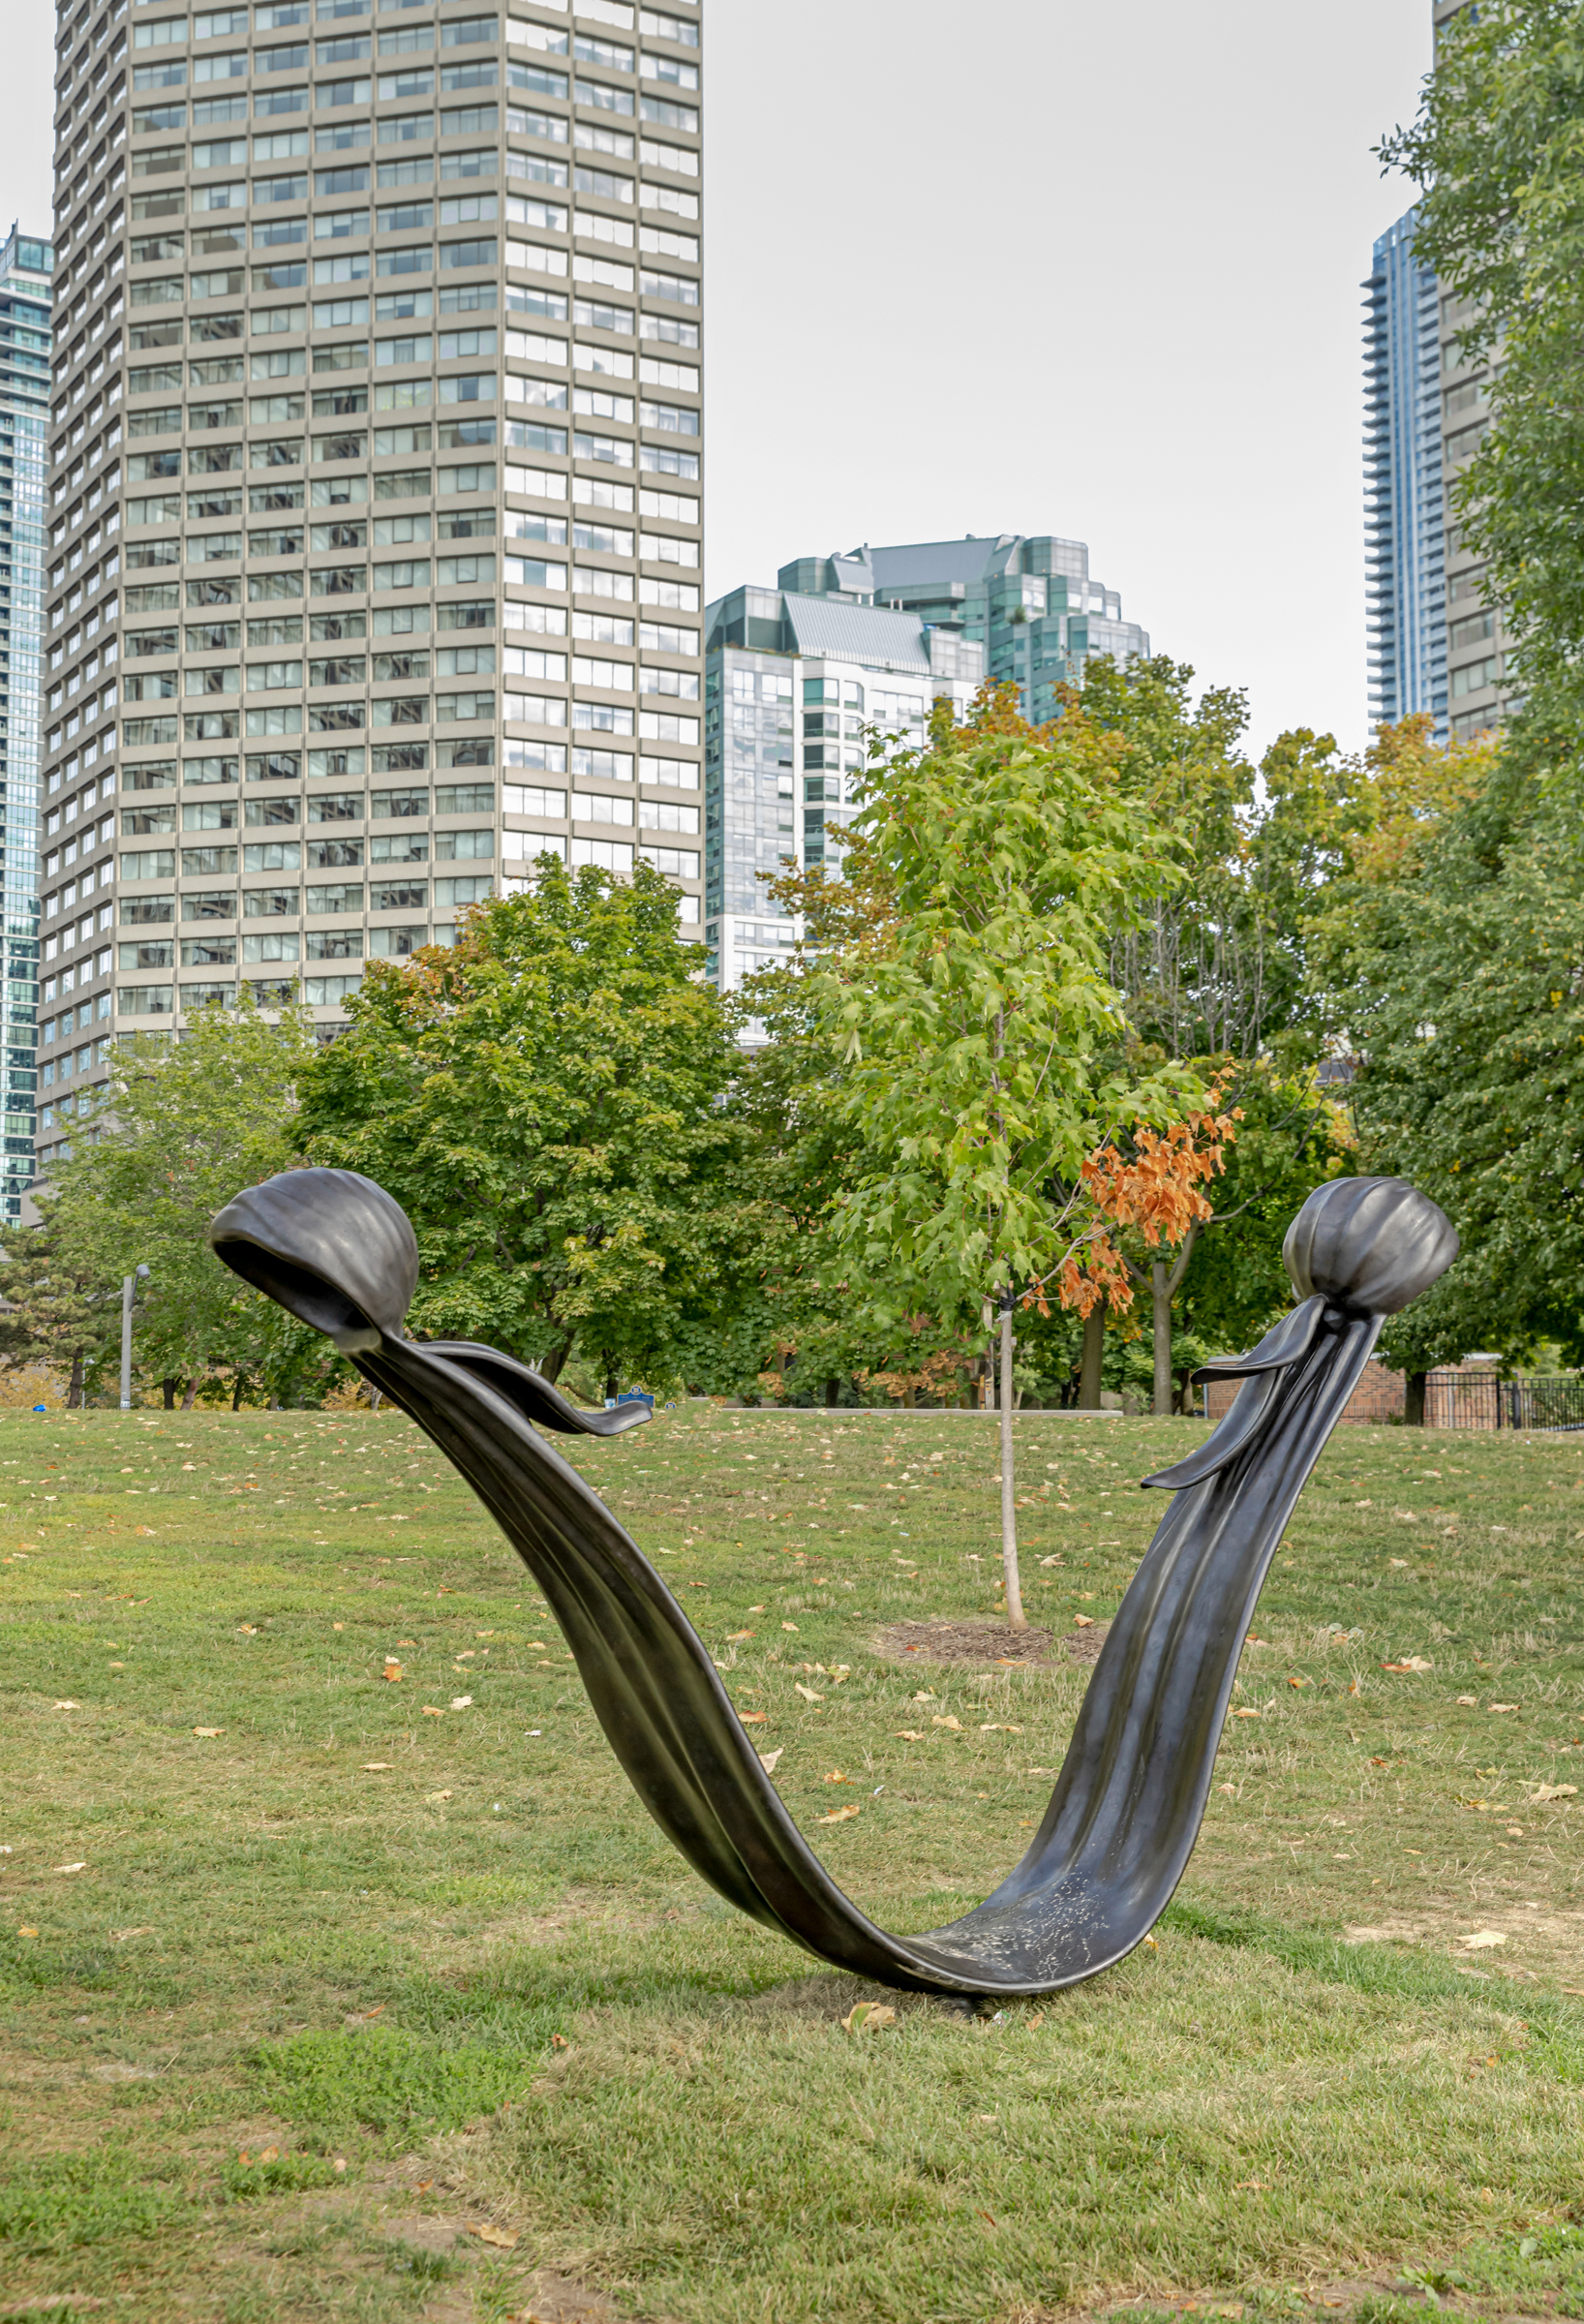     Esmaa Mohamoud, The Brotherhood FUBU (For Us, By Us), (bronze), installation view, Harbour Square Park, Toronto, 2022. Courtesy of the artist. Photo: Toni Hafkenscheid

